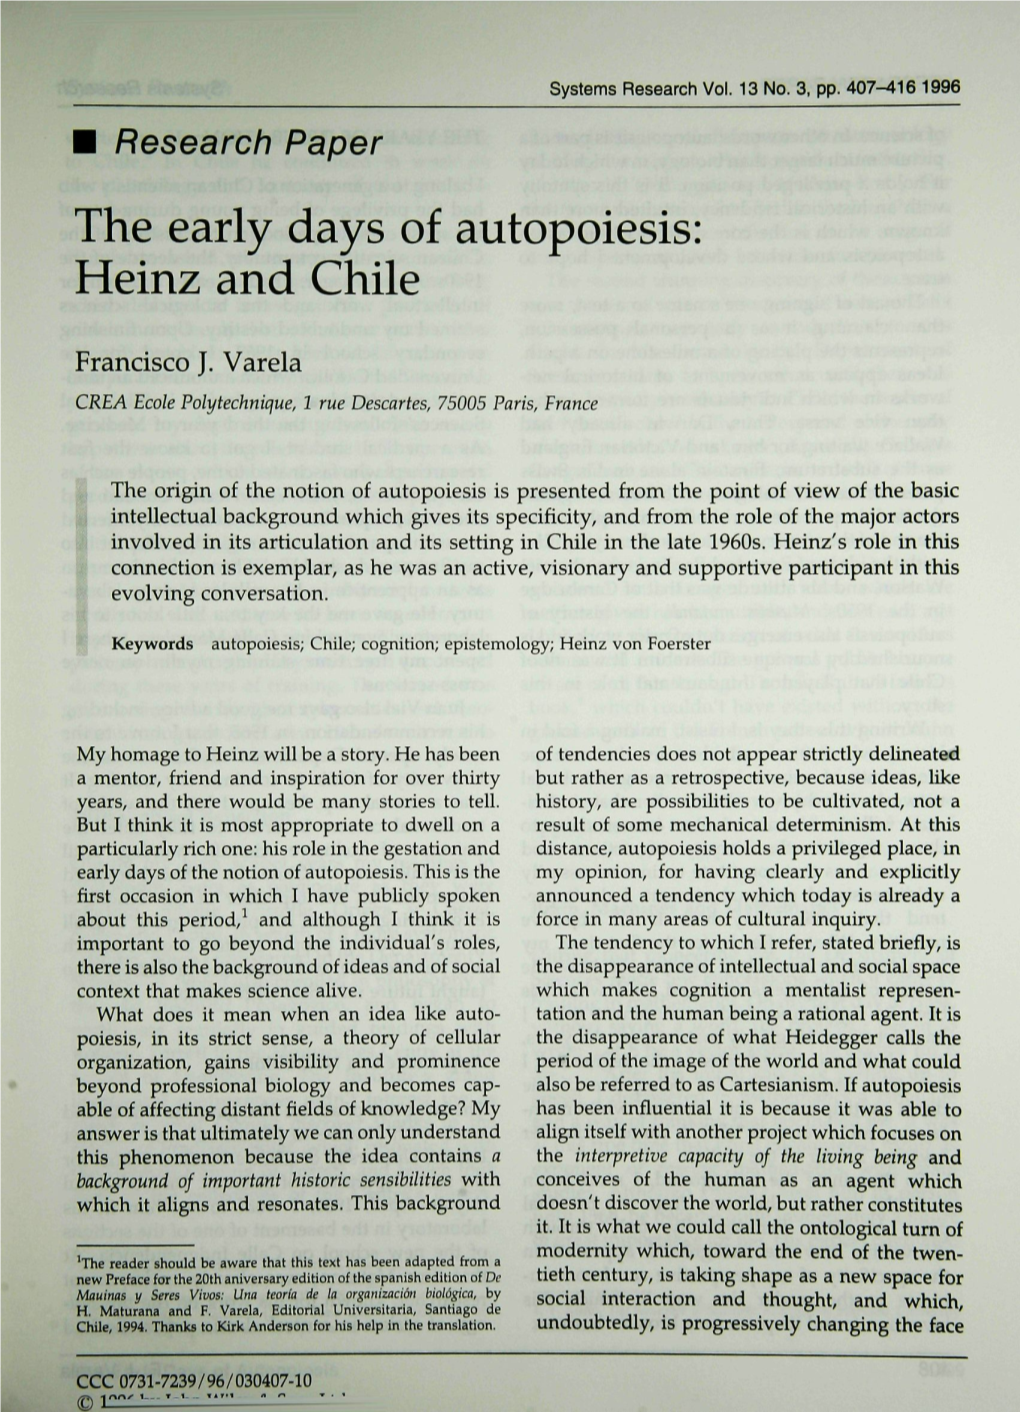 Research Paper the Early Days of Autopoiesis: Heinz and Chile